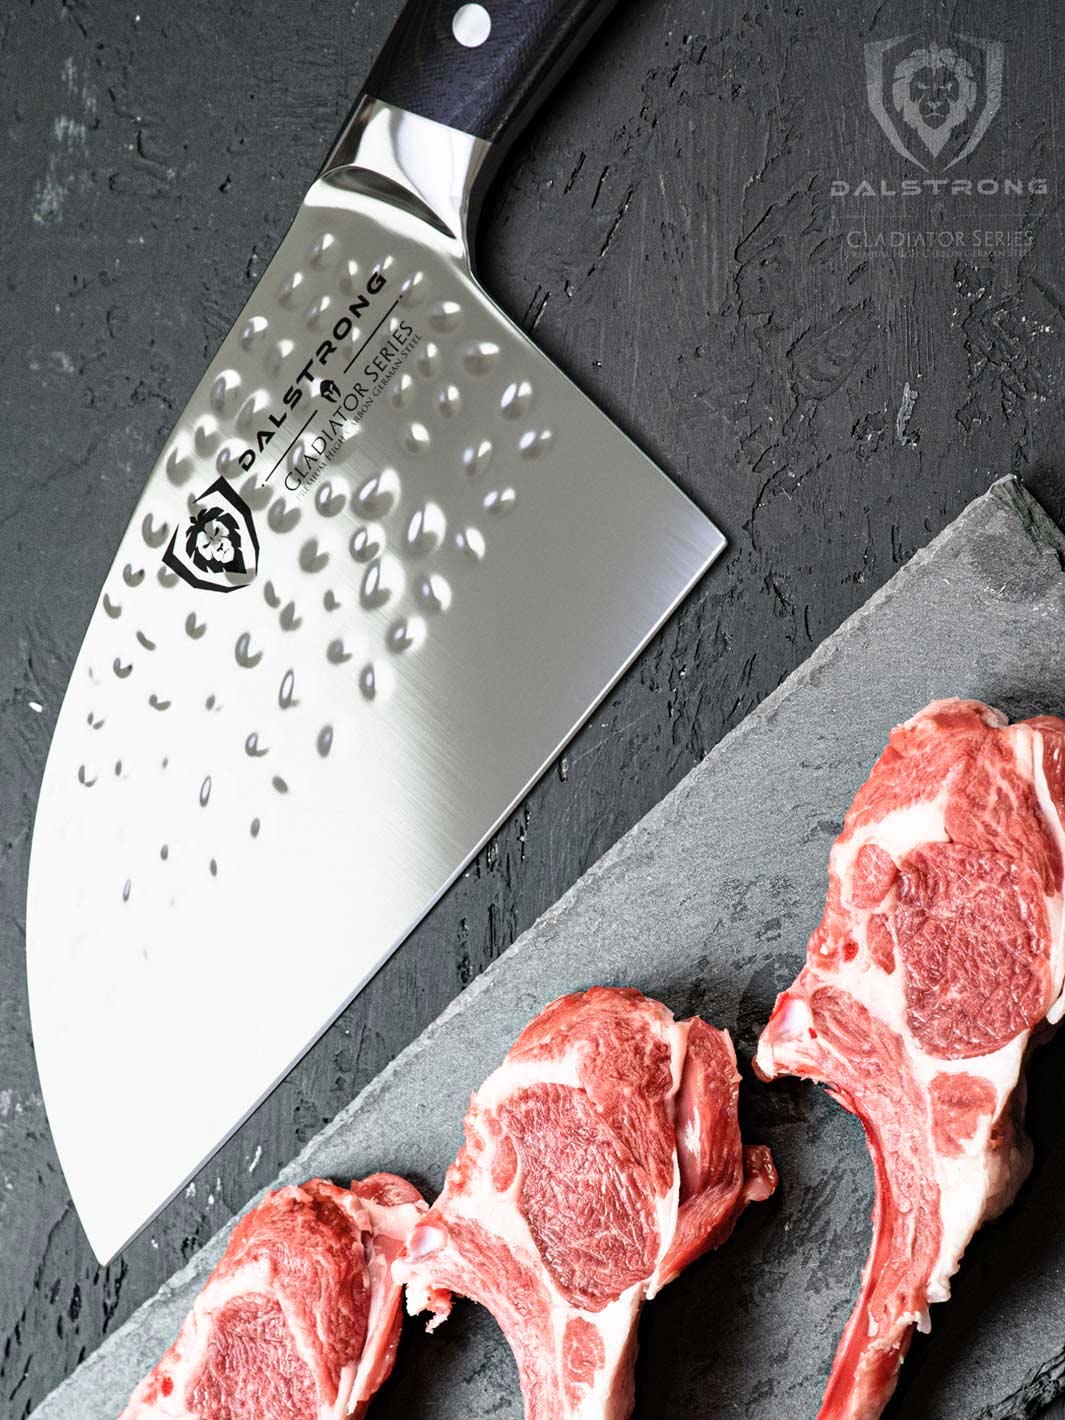 Dalstrong Cleaver Gladiator Series German HC Steel